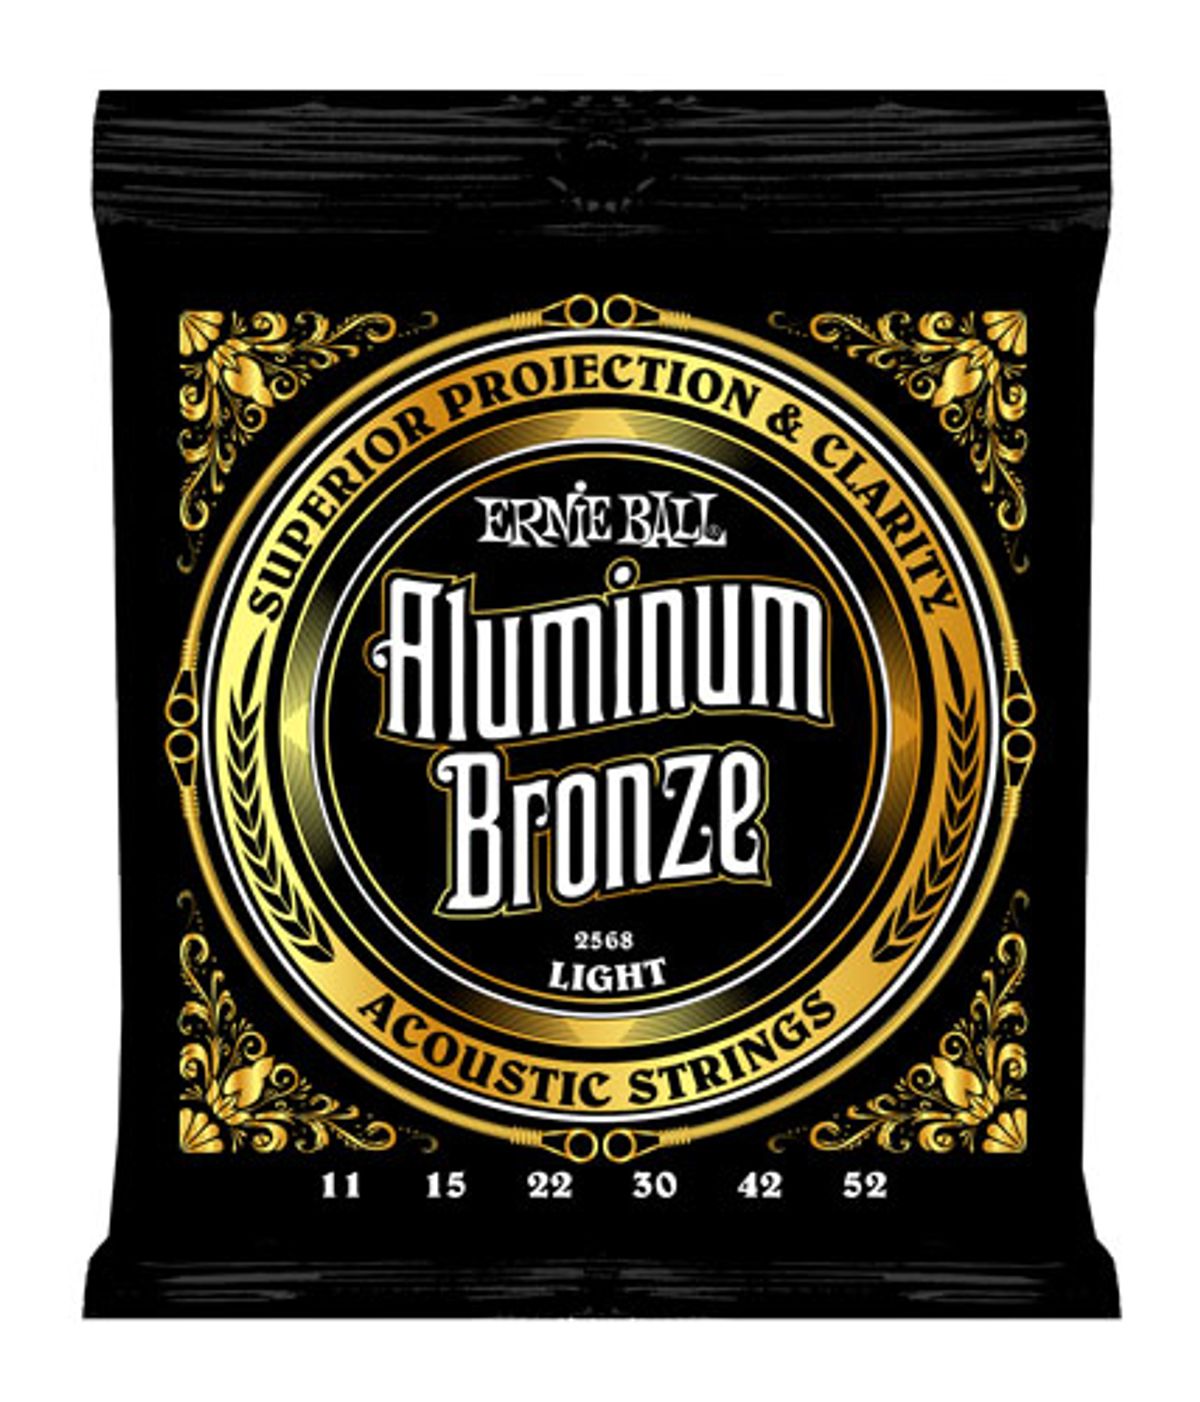 Ernie Ball Introduces Aluminum Bronze and M-Steel Strings